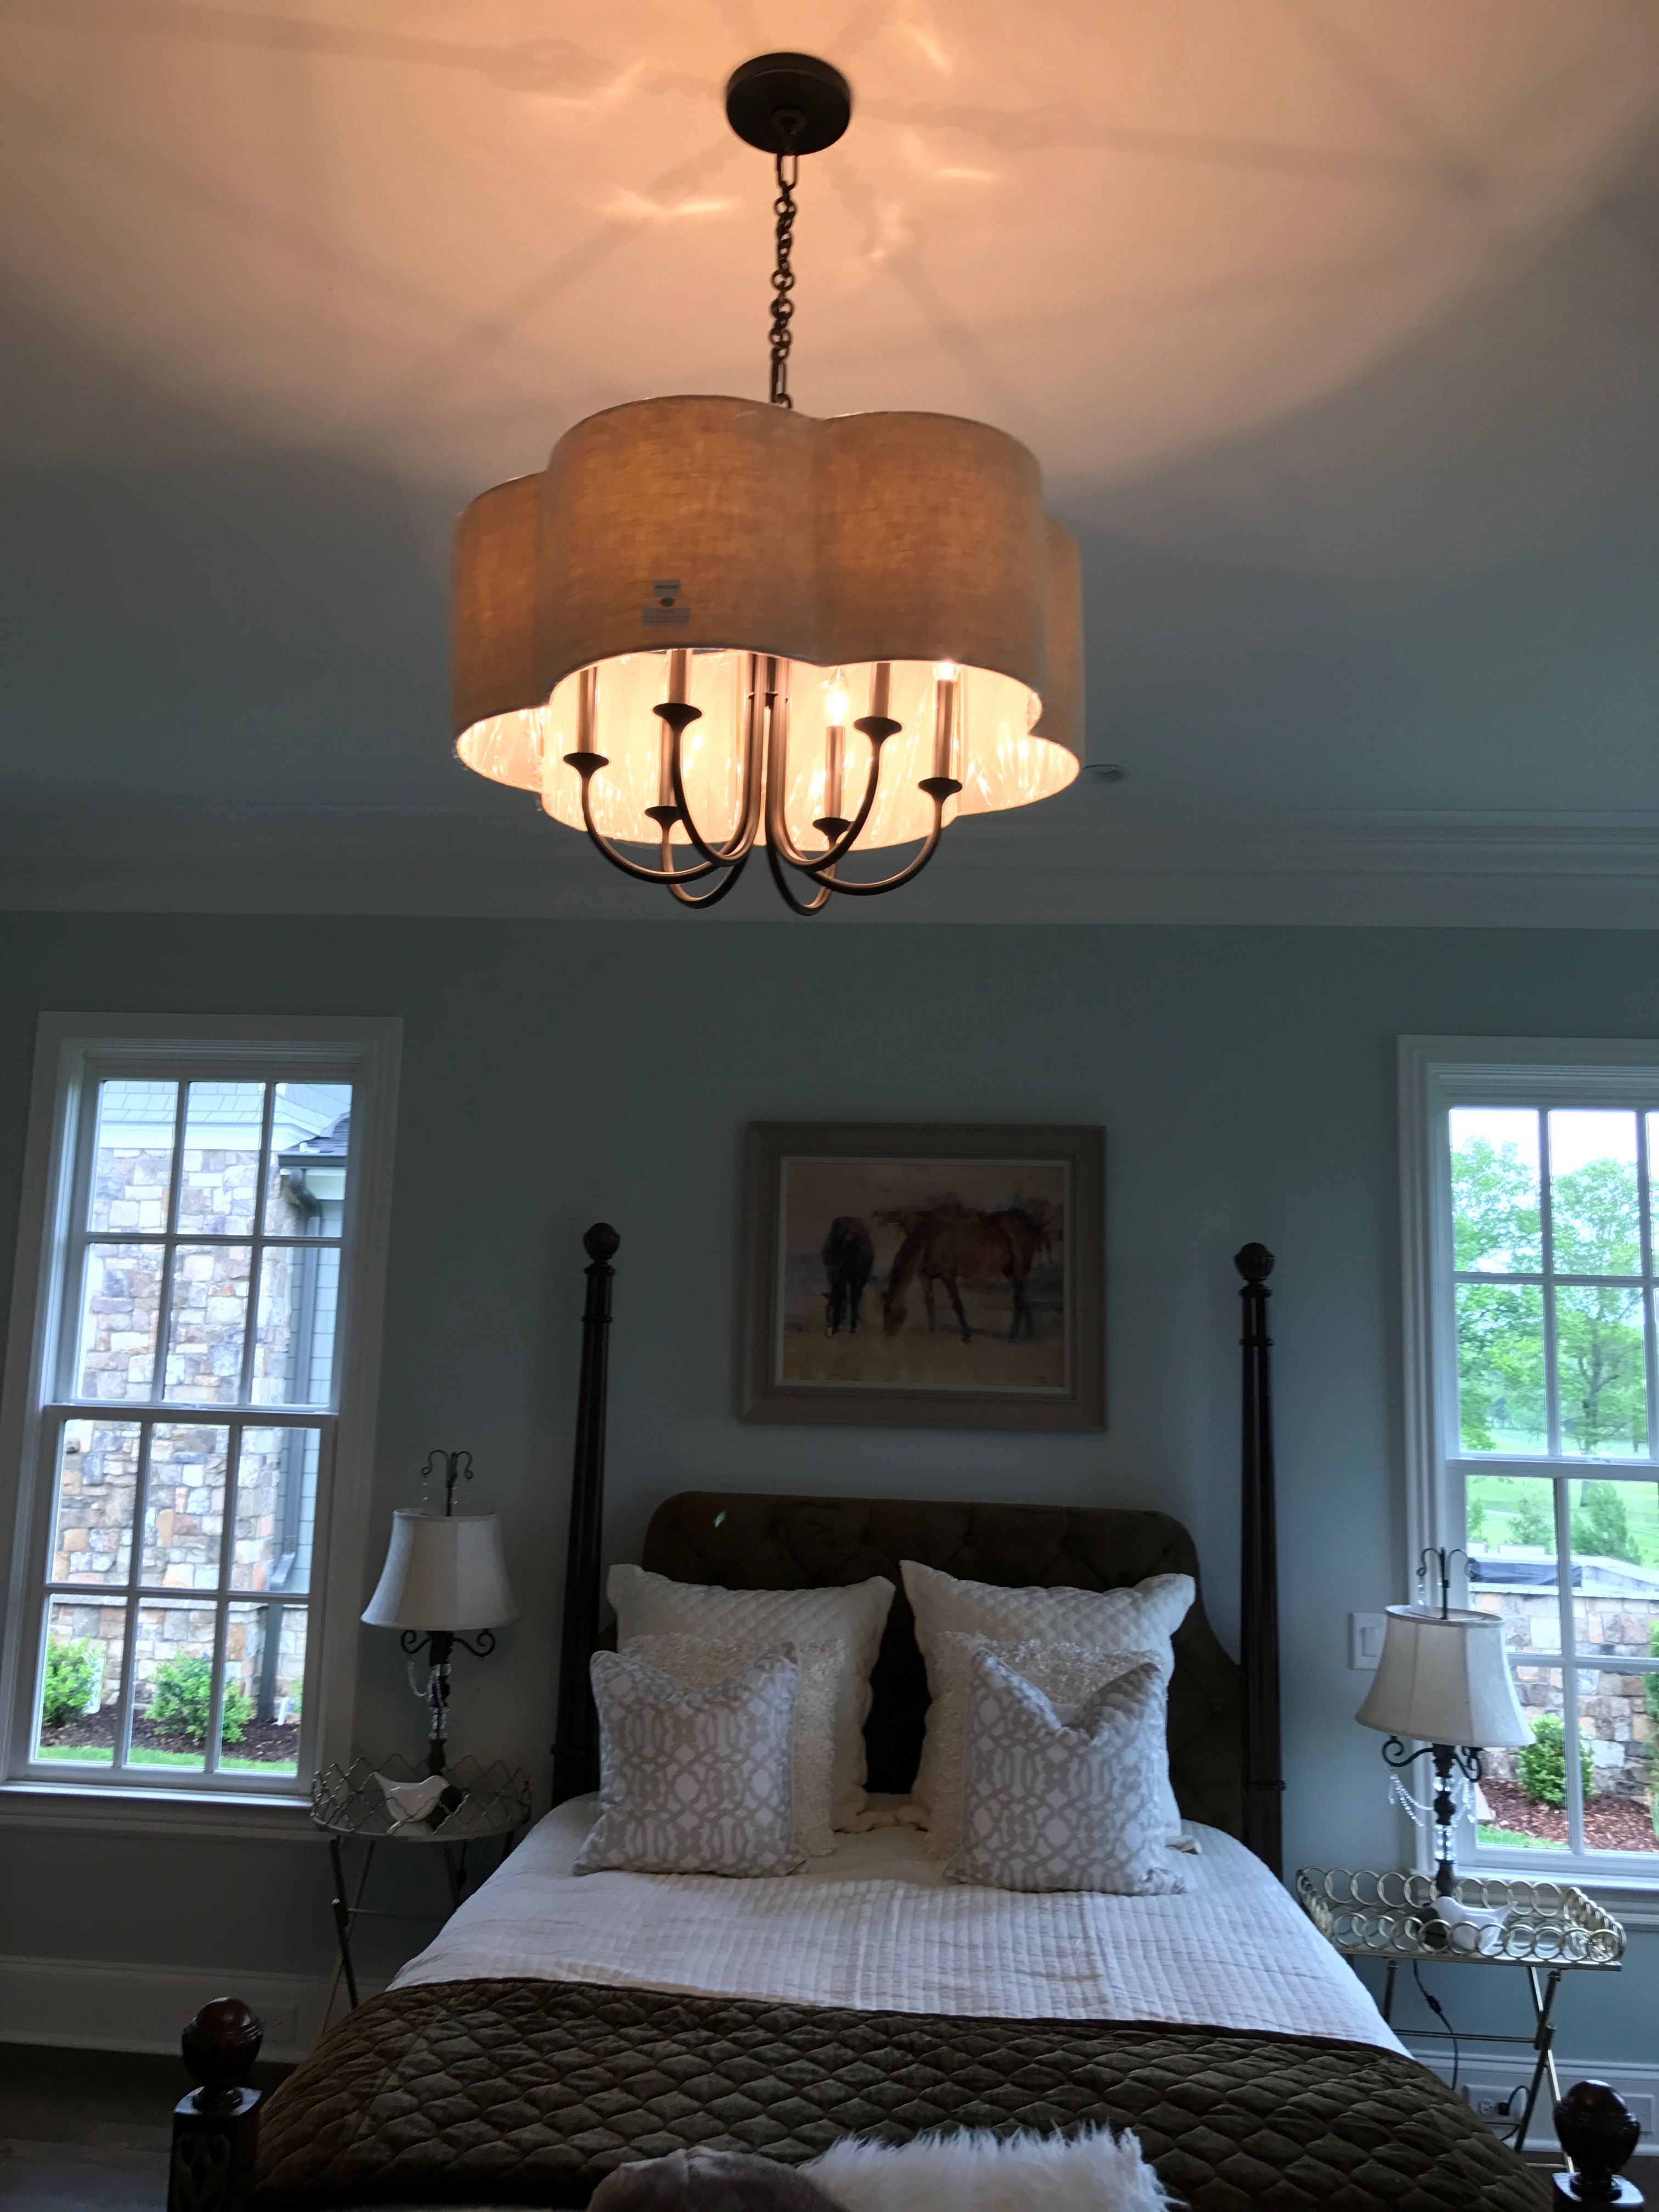 Bedroom Light Fixture Ideas: Creating A Bright And Inviting Atmosphere